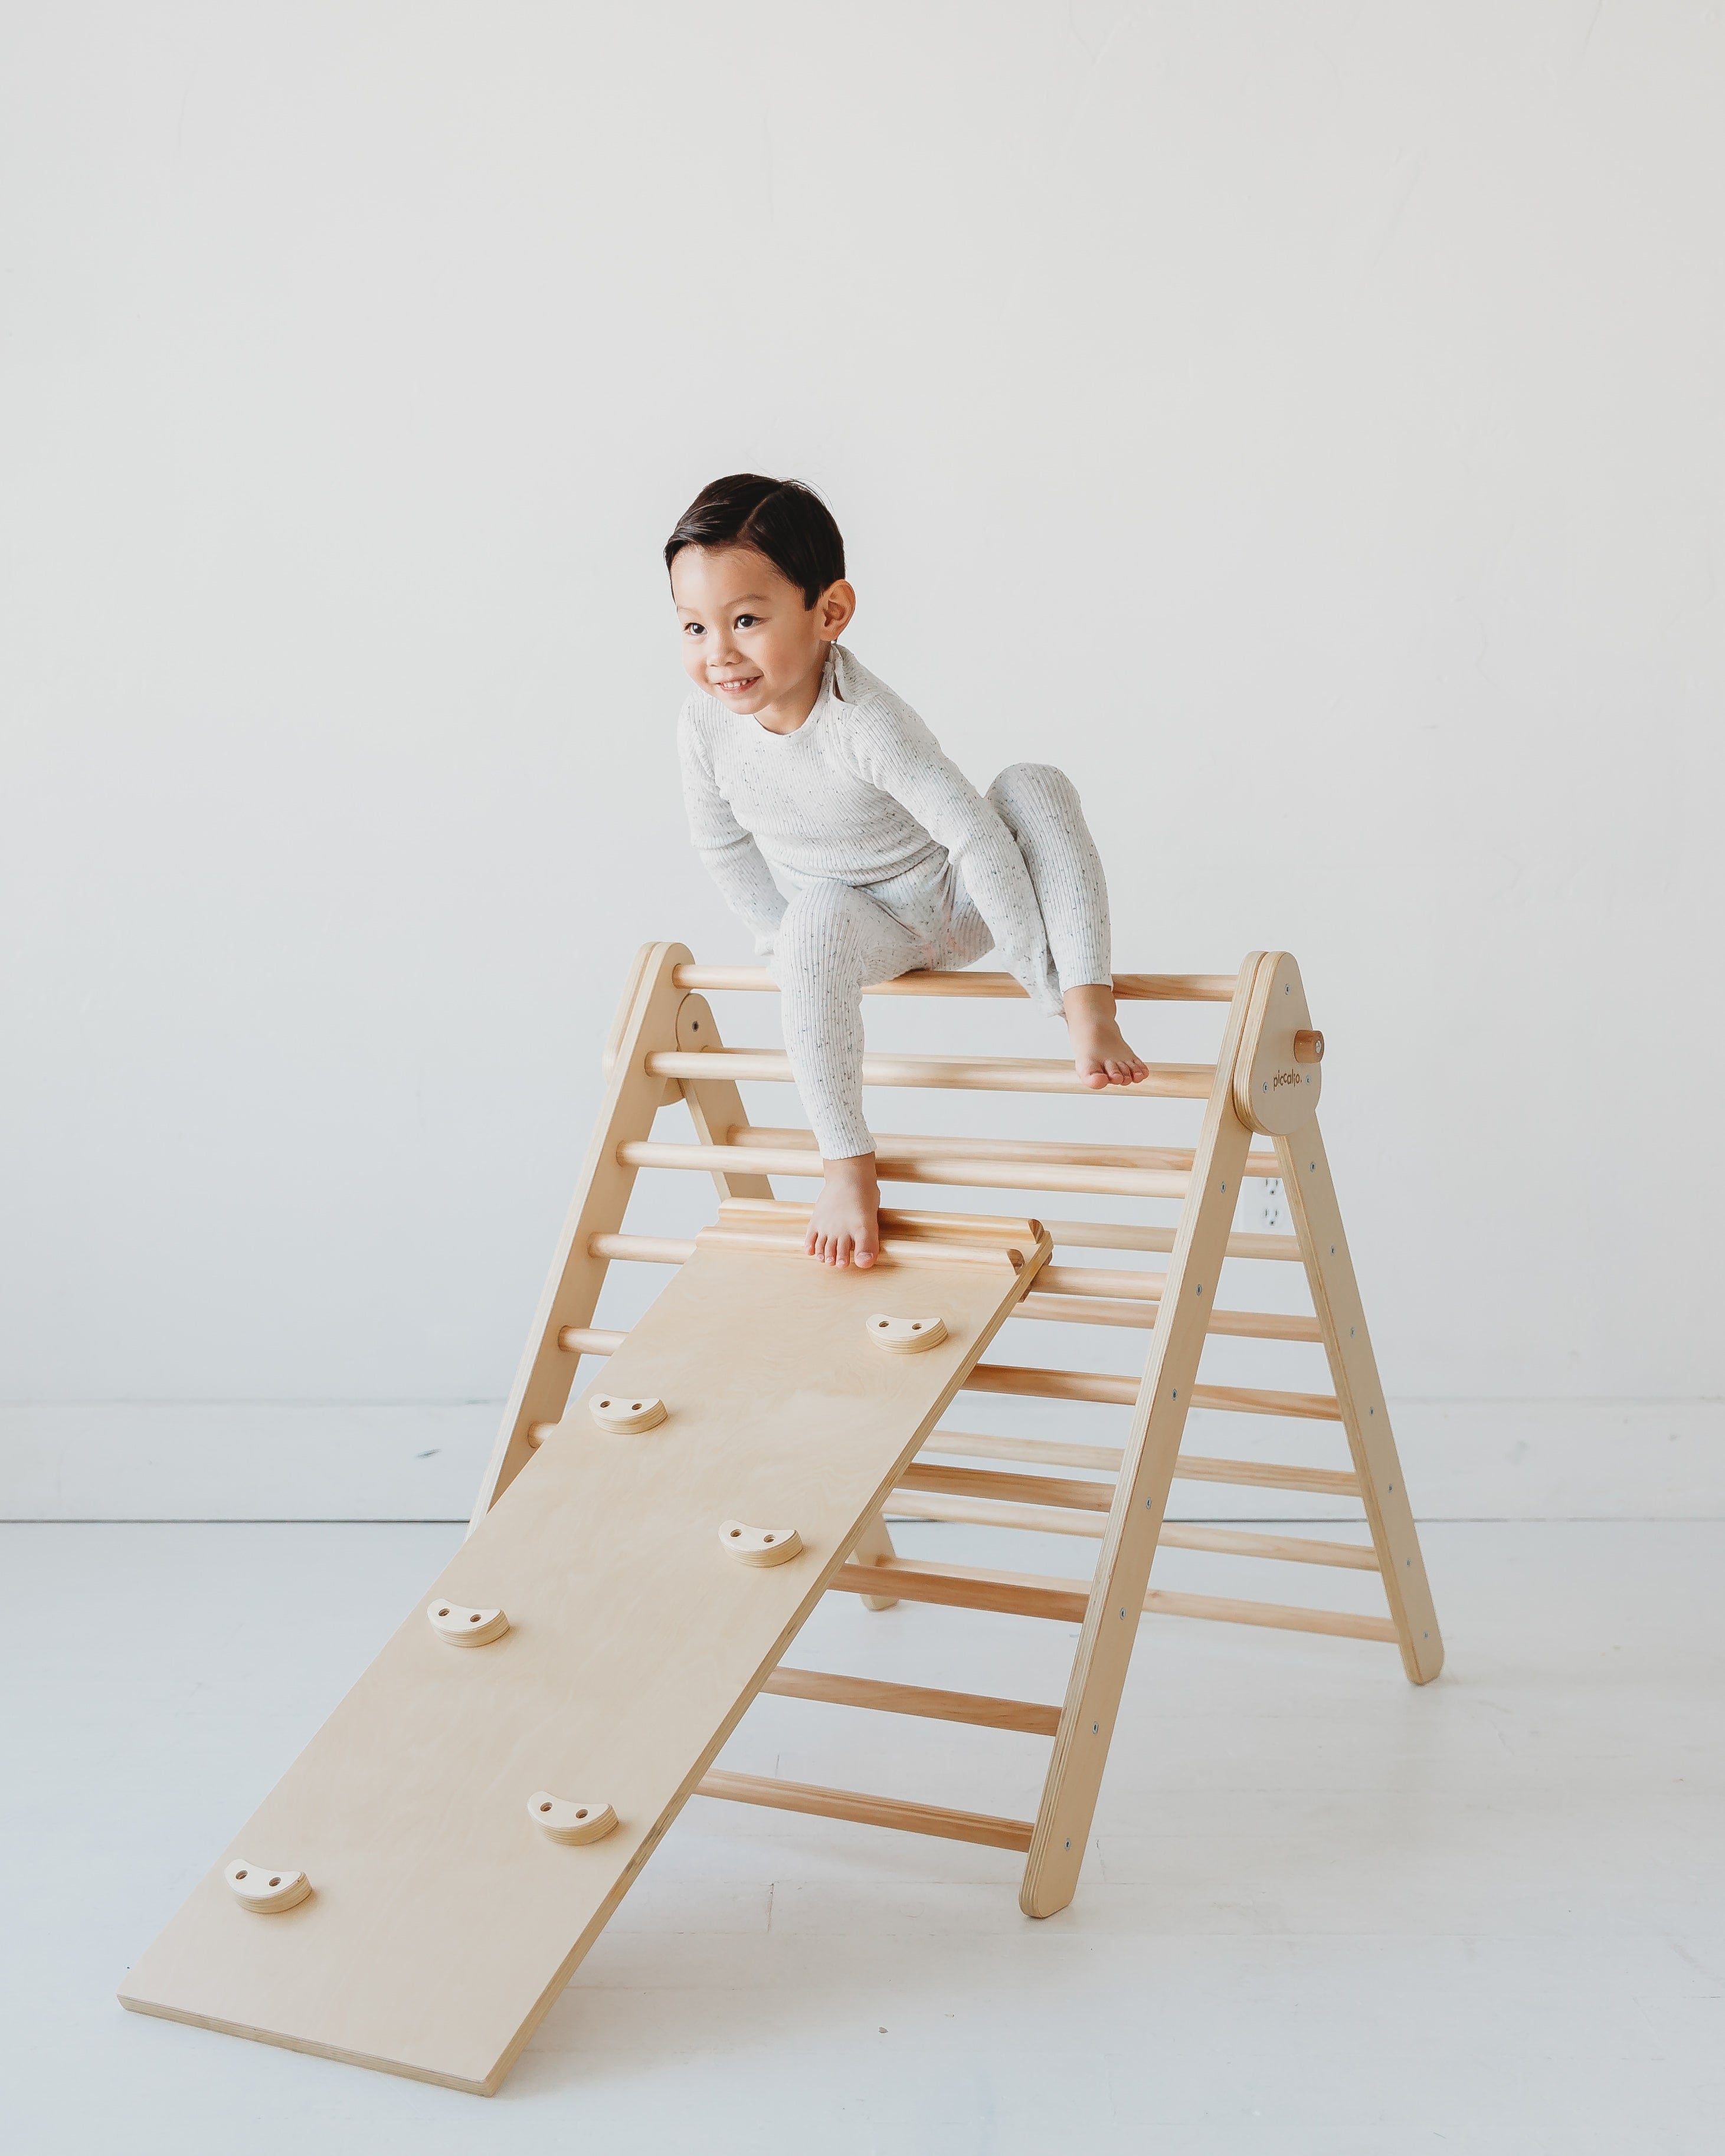 Toddler on a Piccalio Montessori climbing toy